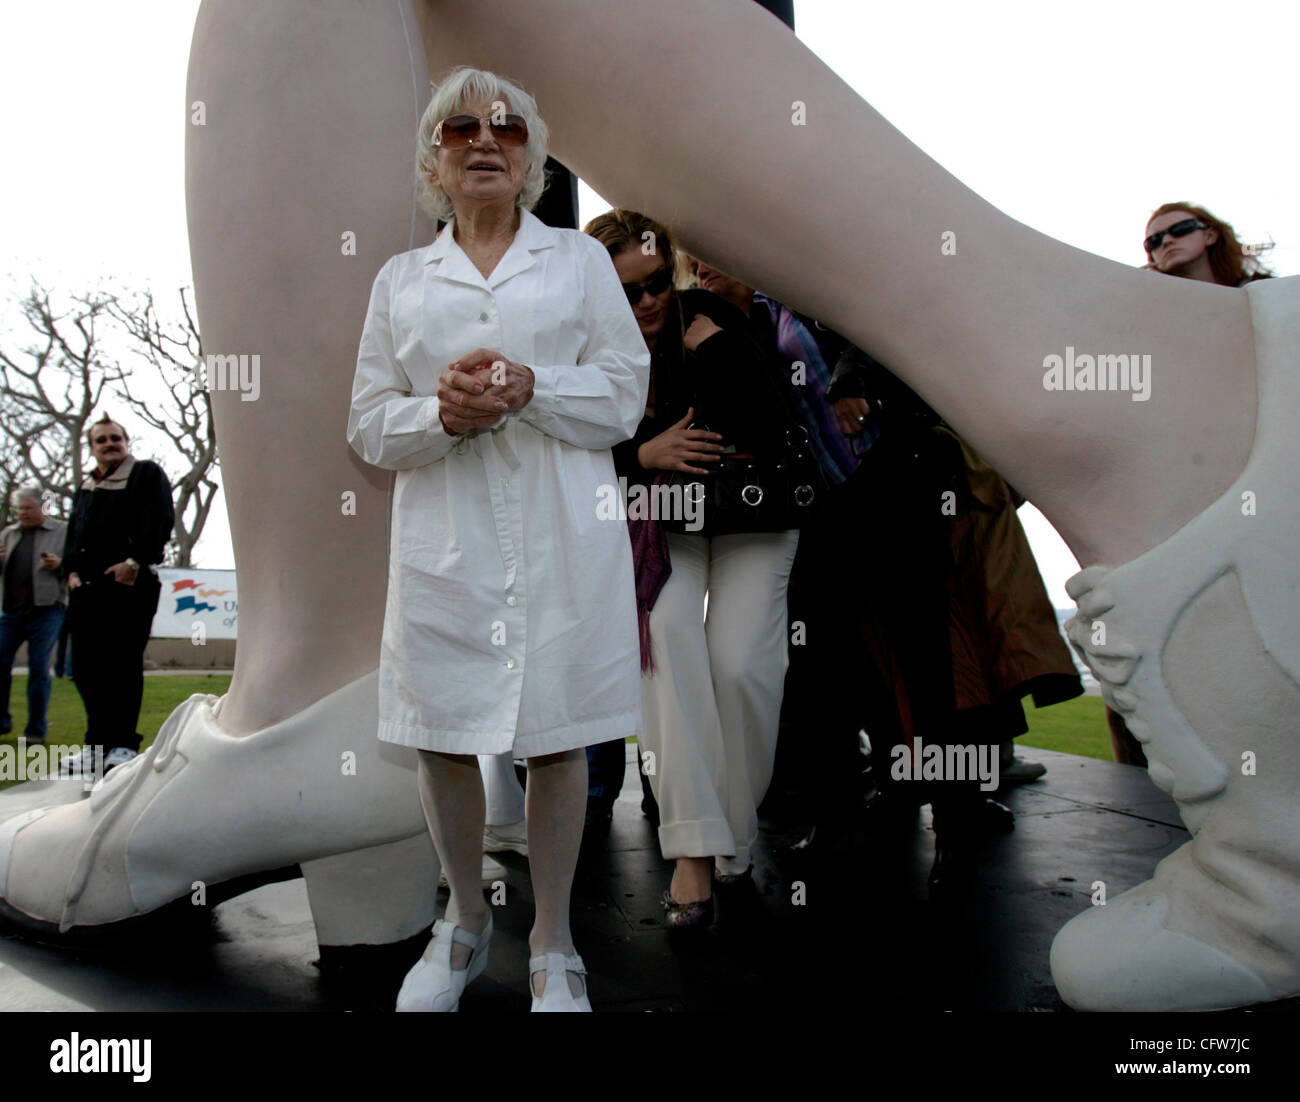 February 10, 2006 San Diego, CA EDITH SHAIN<cq> of Century City, California, center, talks to fans and onlookers under a 25-foot tall, 6,000-pound sculpture by J. SEWARD JOHNSON, called 'Unconditional Surrender', which was unveiled at the park near Tuna Harbor in downtown San Diego, California. The  Stock Photo